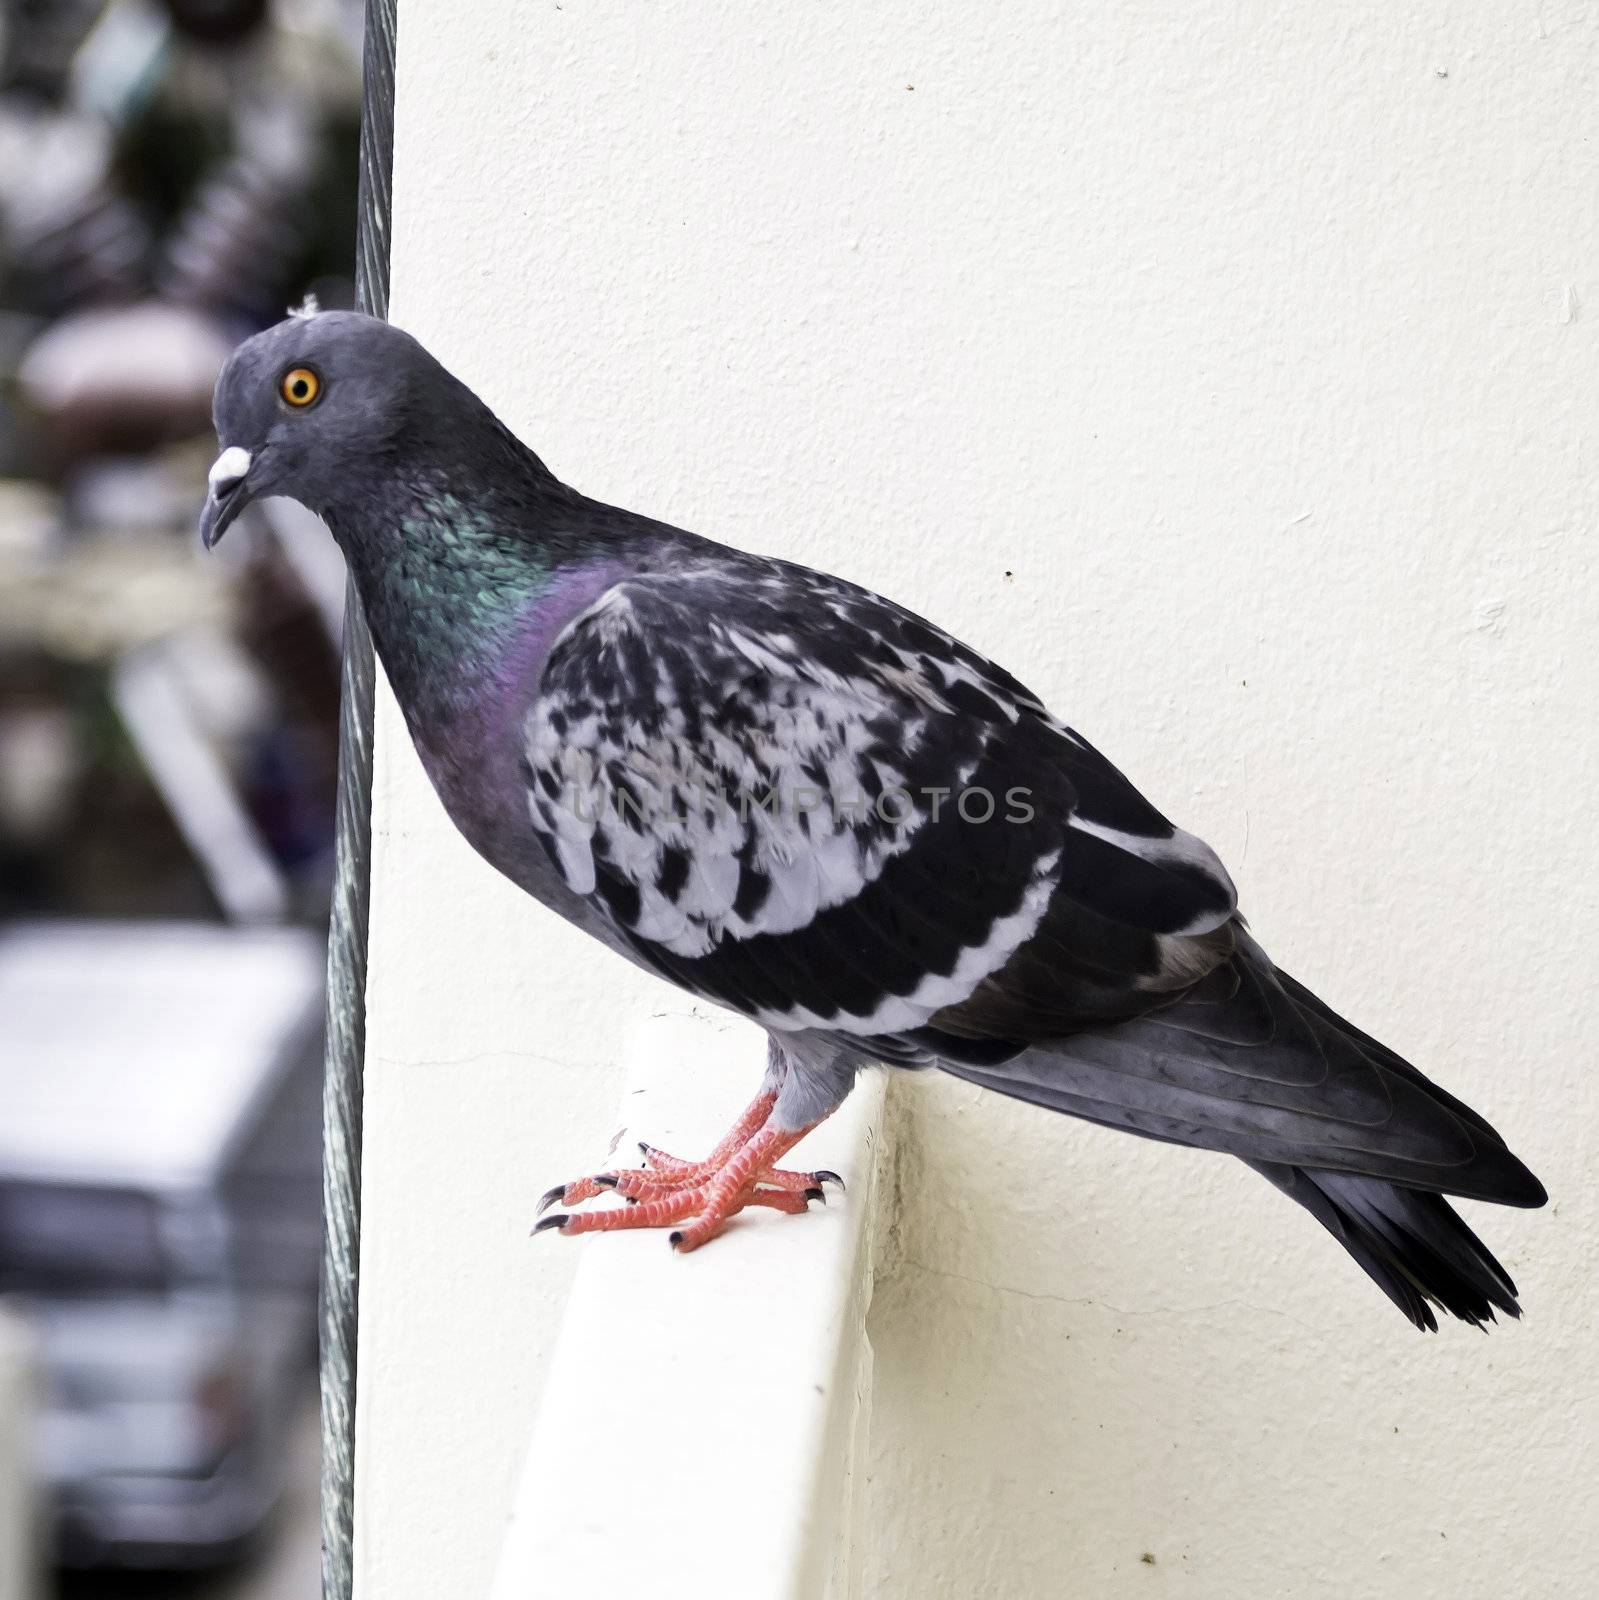 One grey pigeon standing on banister